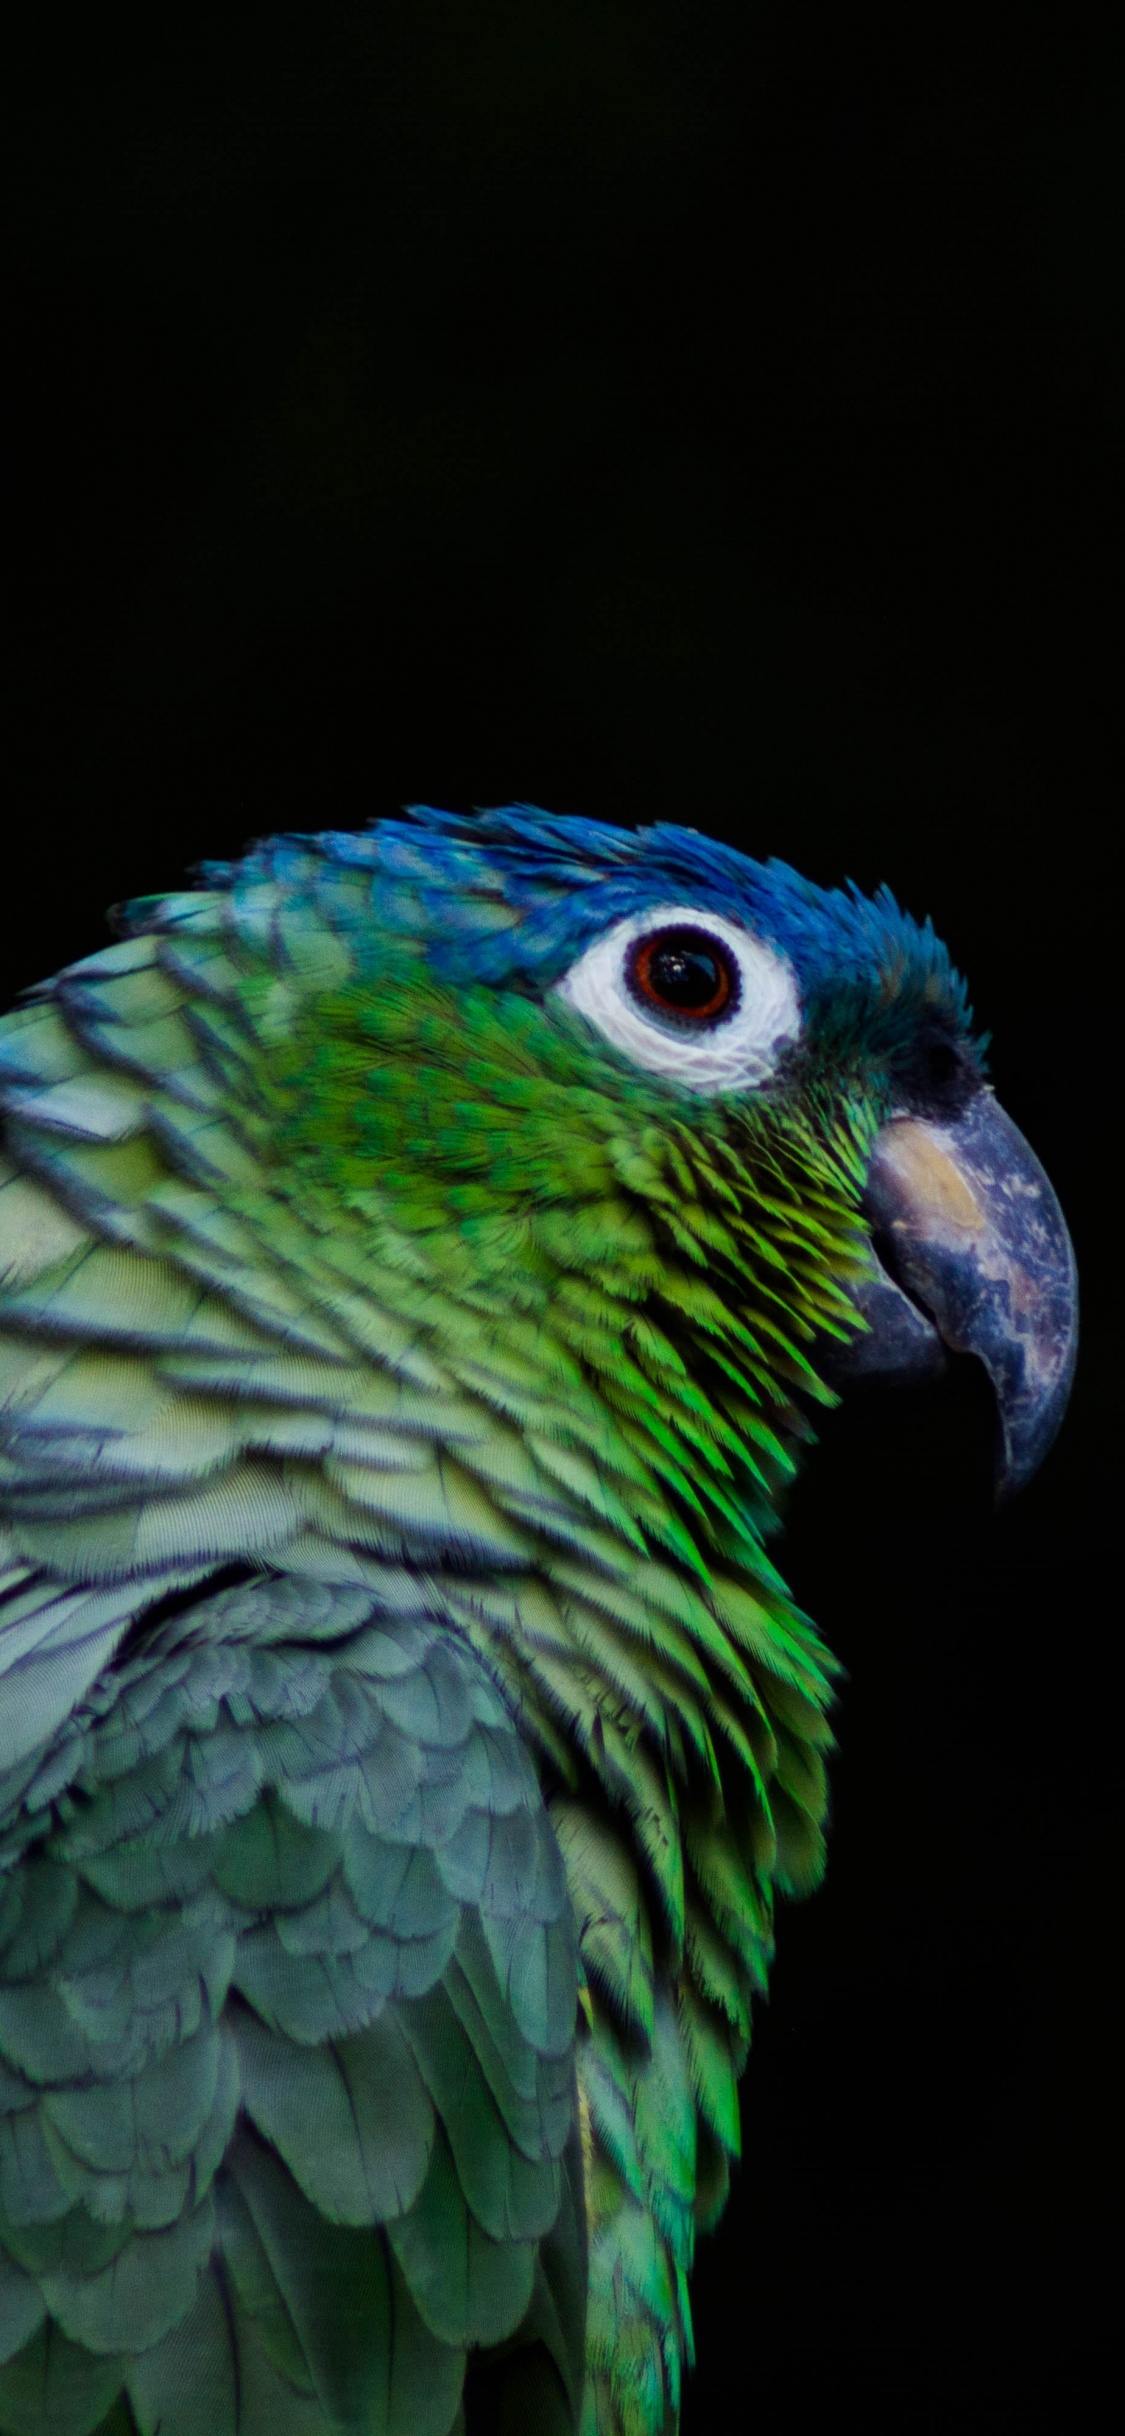 Green and Blue Parrot in Close up Photography. Wallpaper in 1125x2436 Resolution